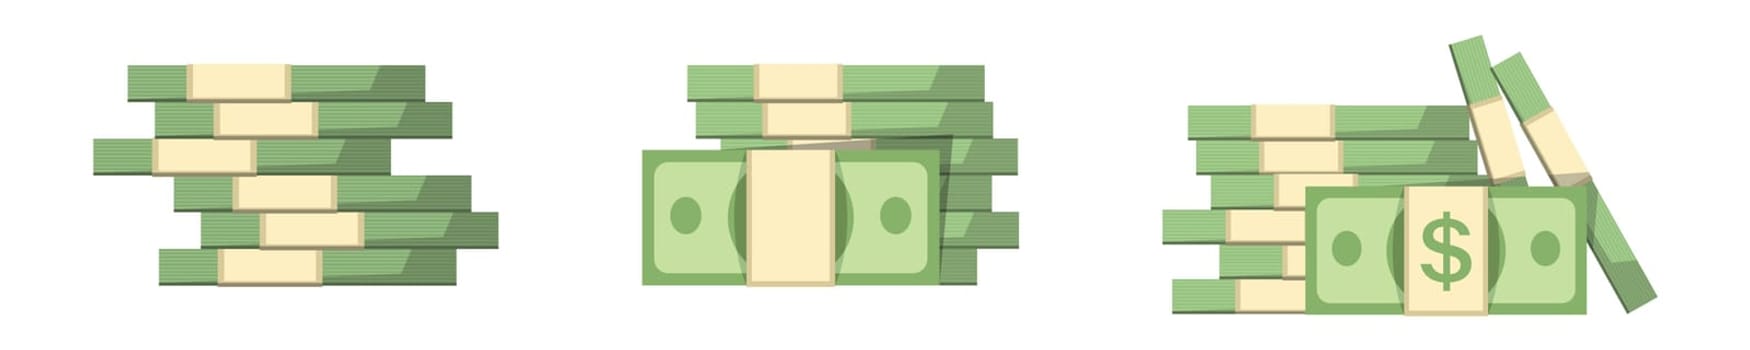 Paper bills icon in flat style. Stack of currency banknotes vector illustration on isolated background. Green dollars sign business concept.